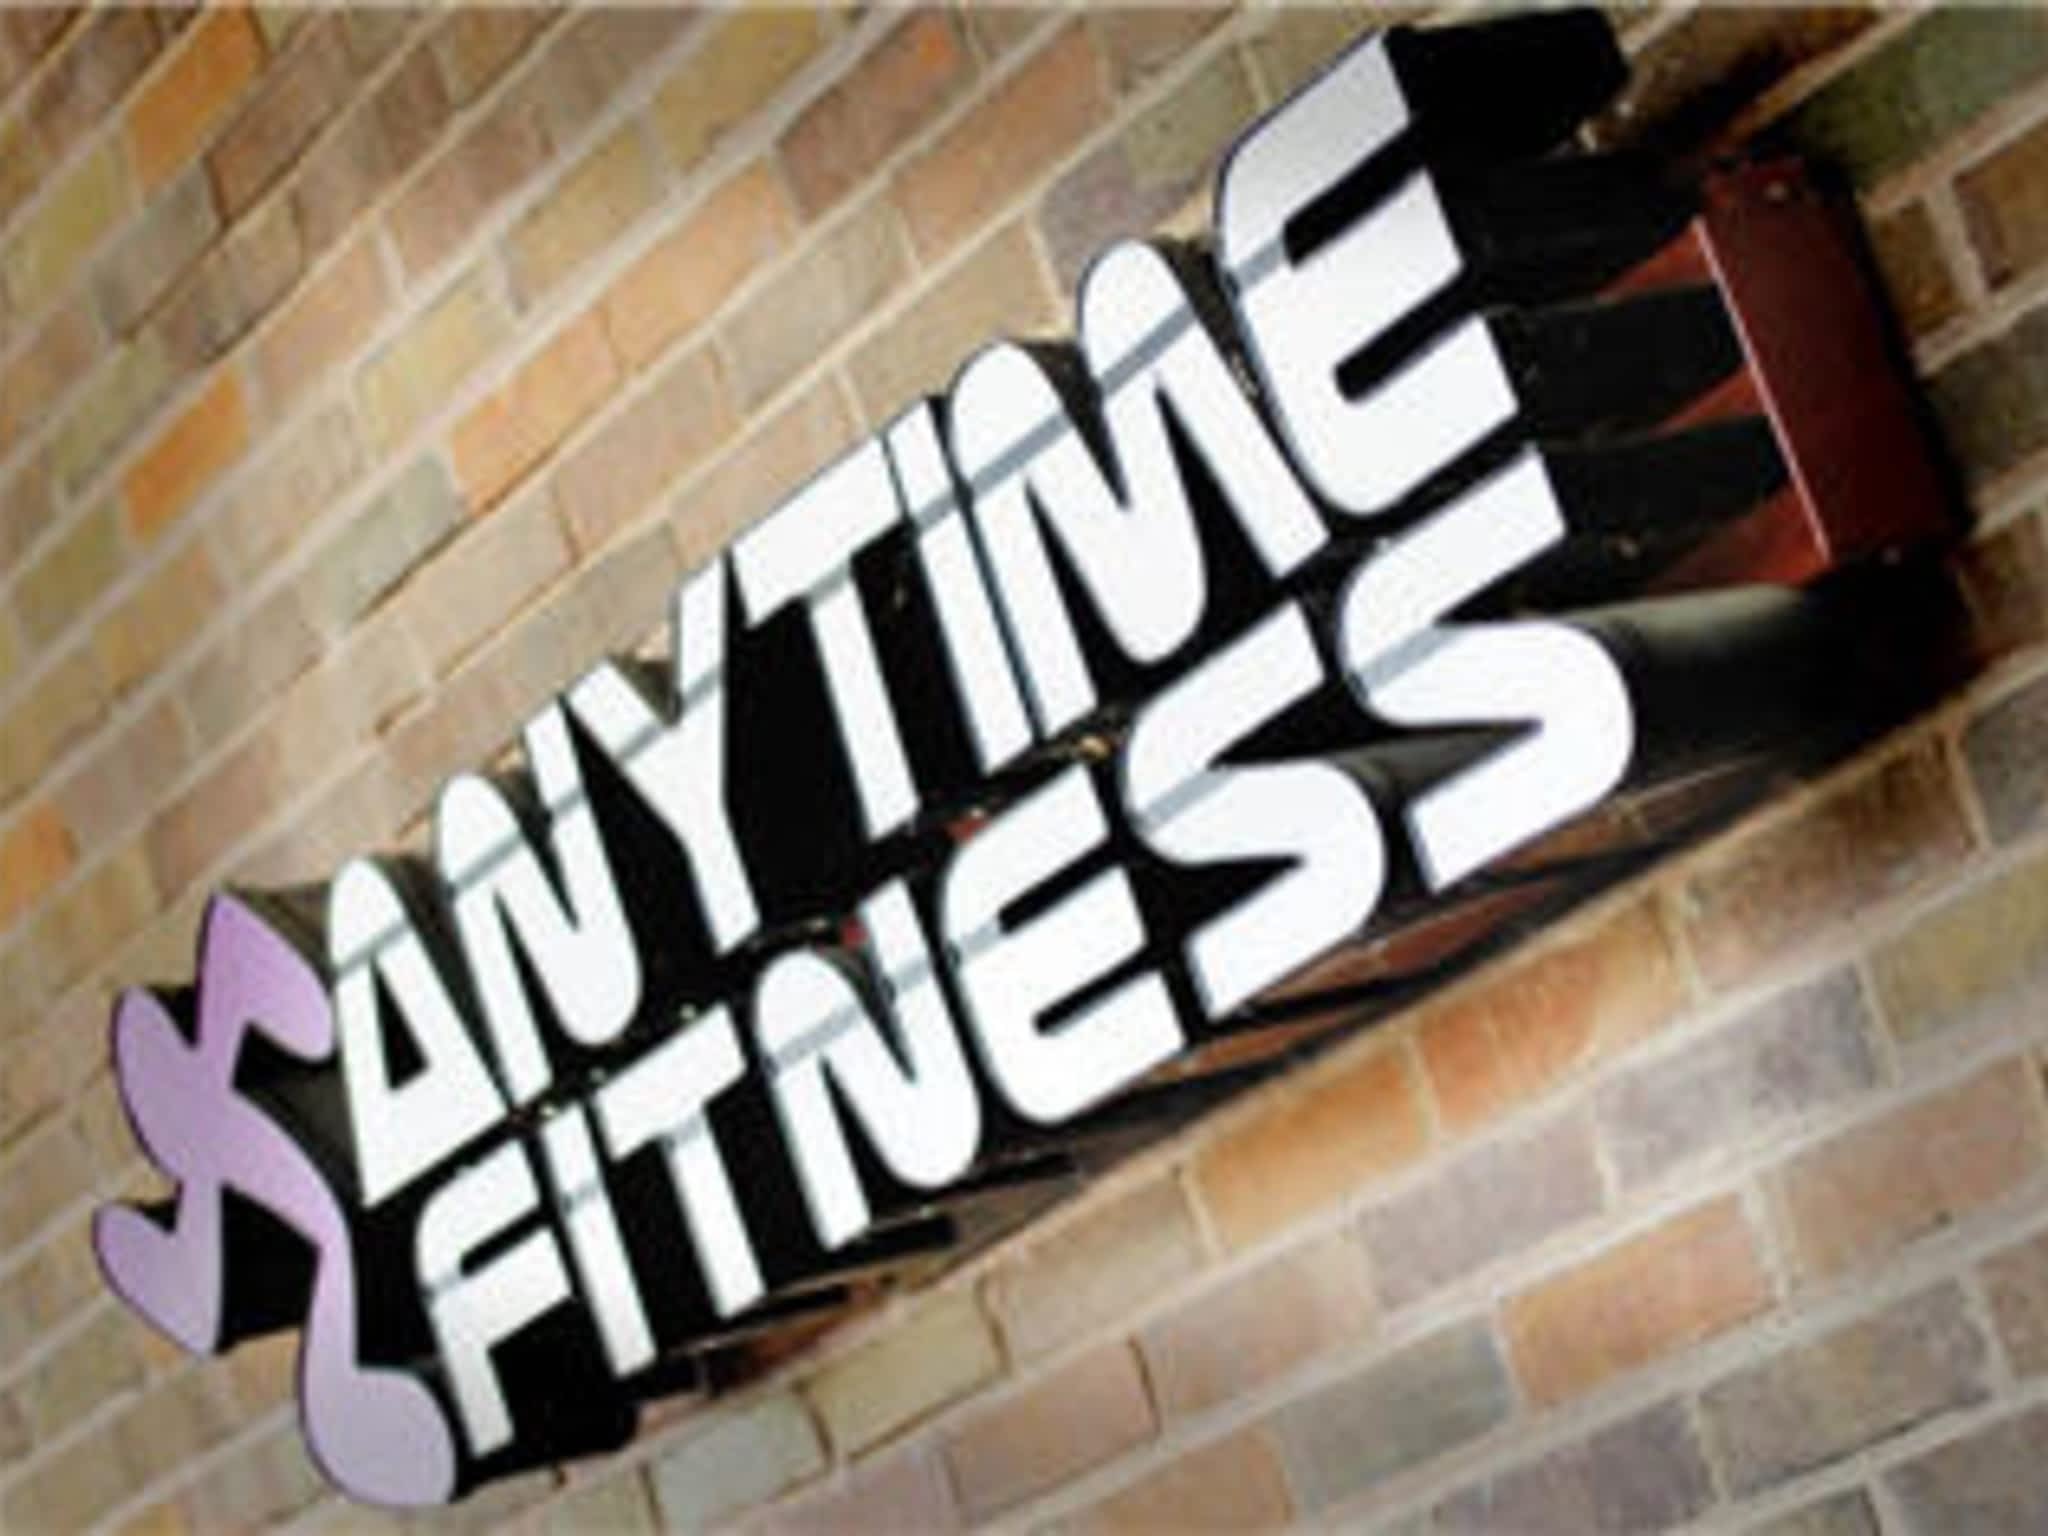 photo Anytime Fitness